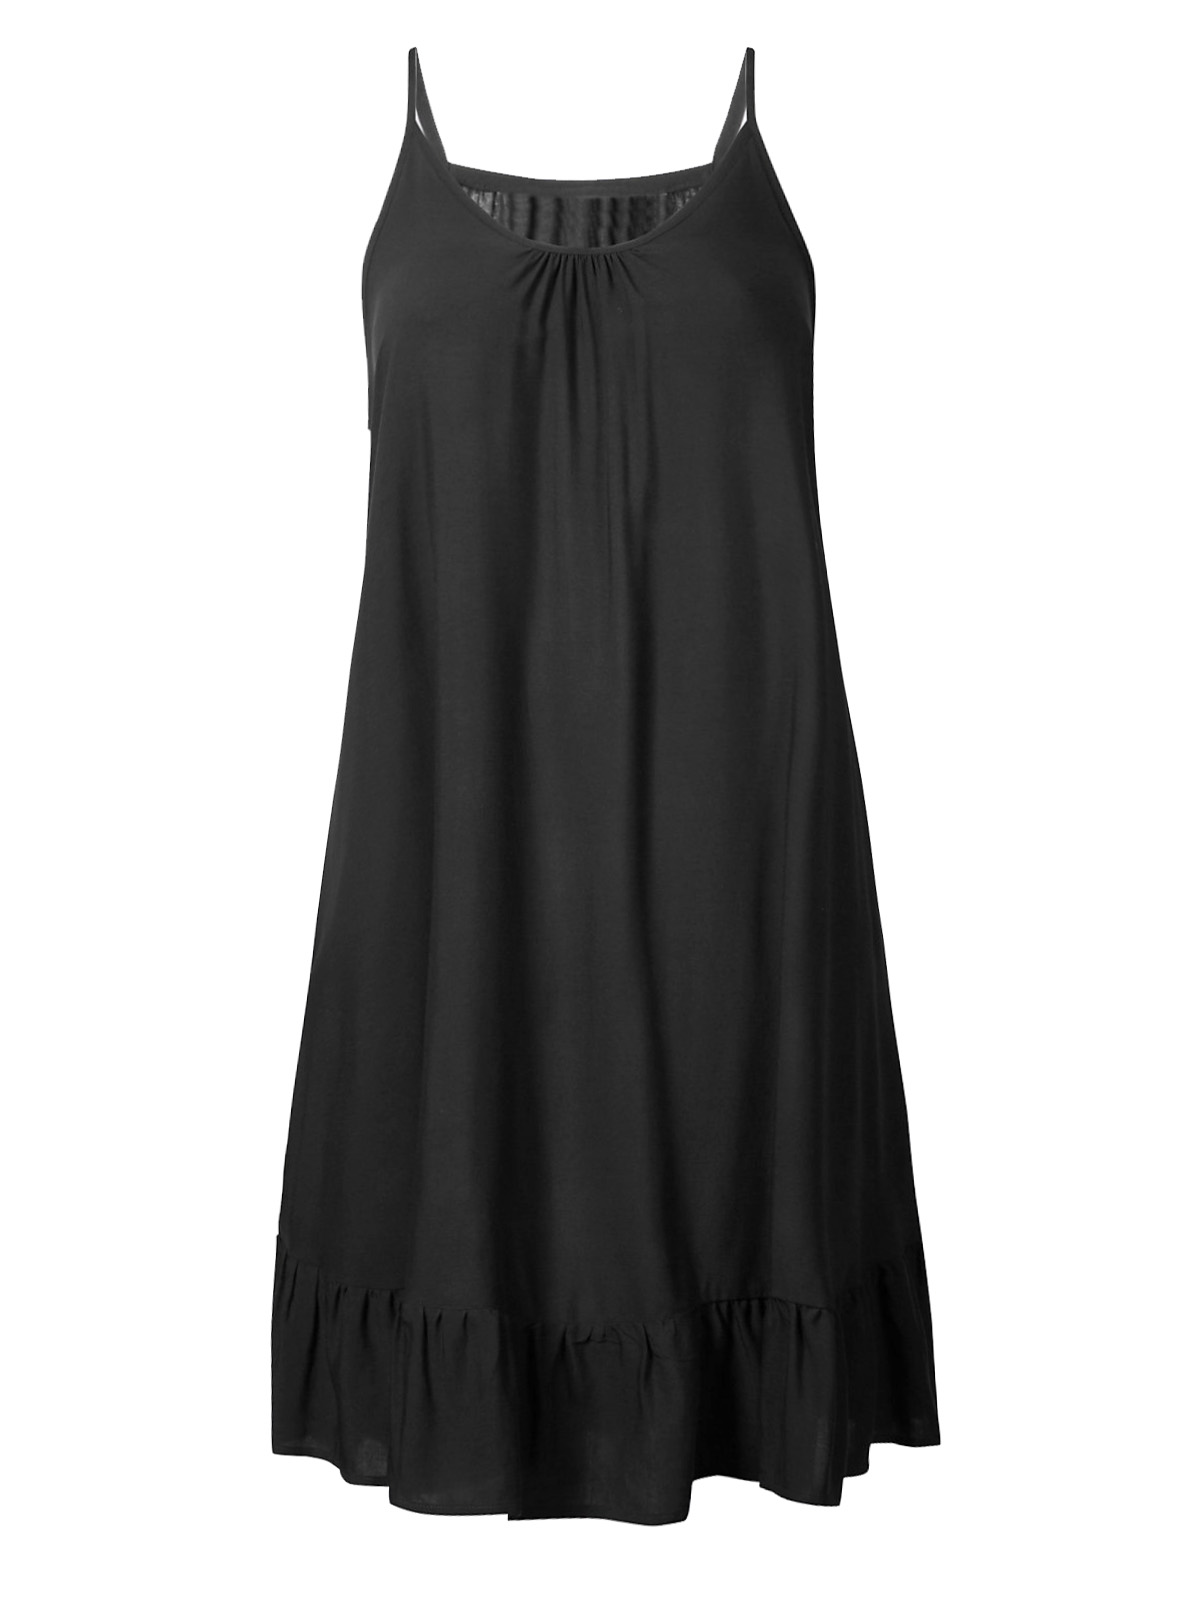 Marks and Spencer - - M&5 BLACK Woven Strappy Beach Dress - Size 8 and 10